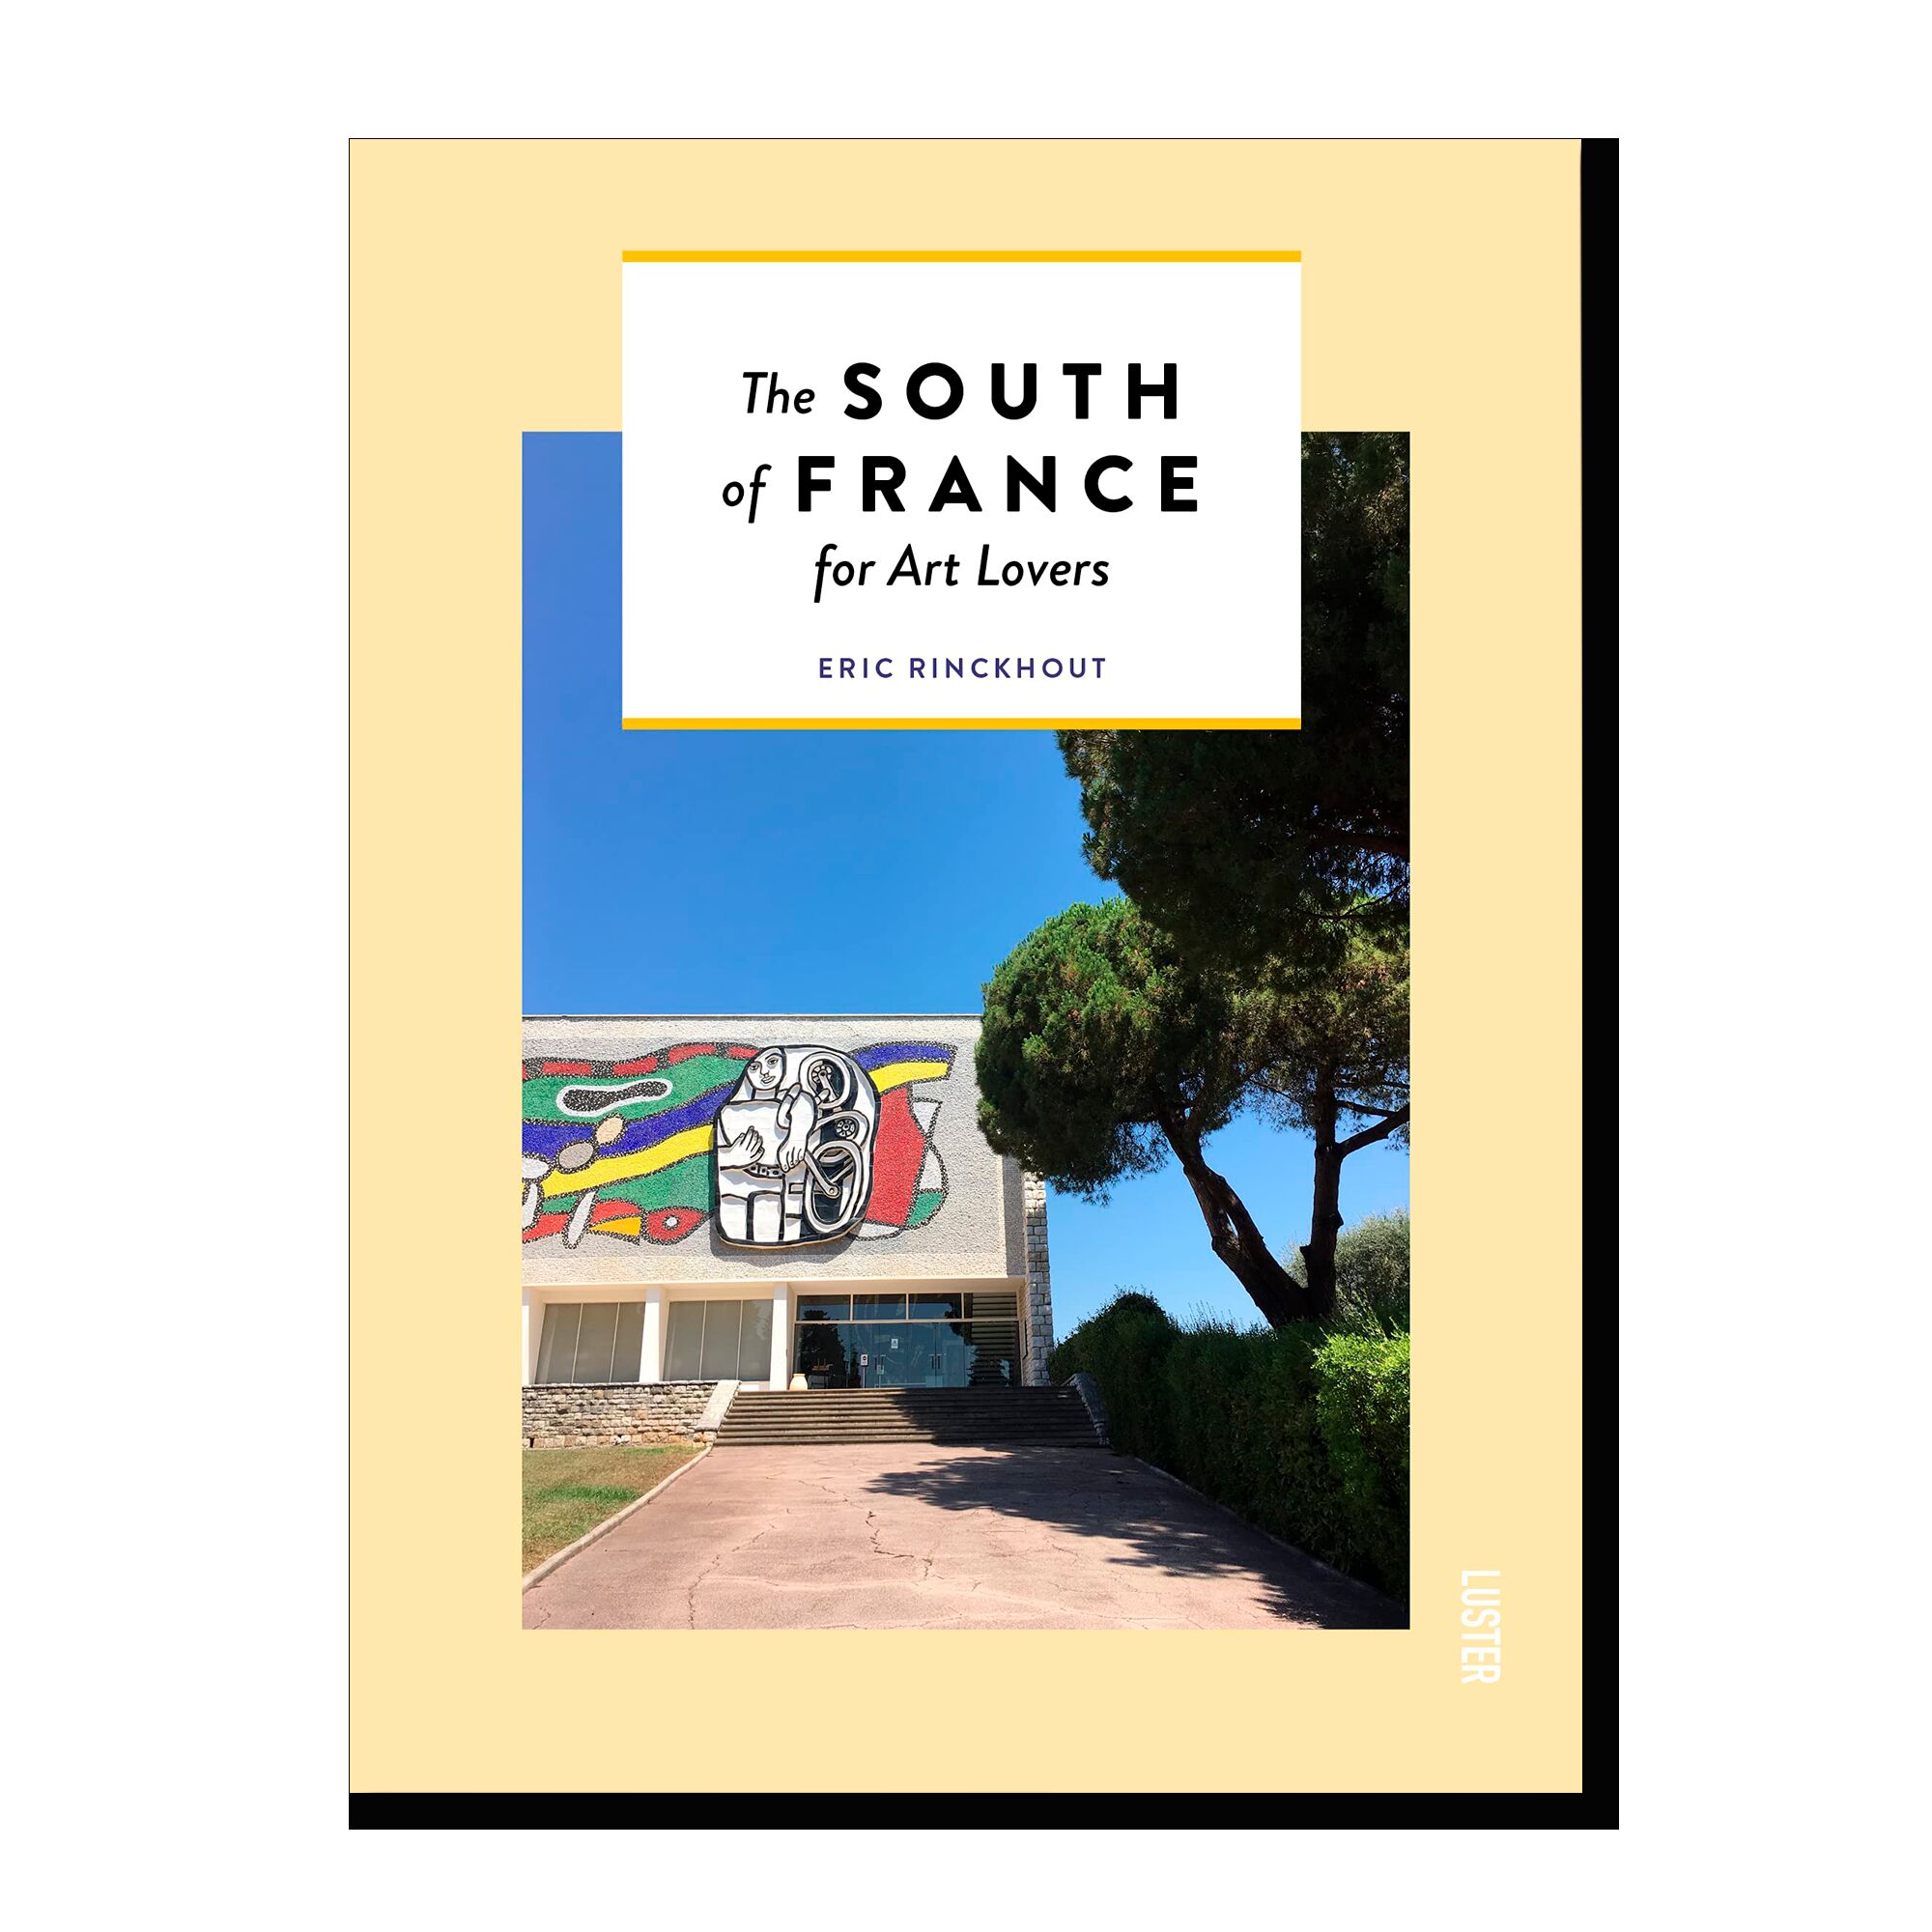 The South of France for Arts Lovers